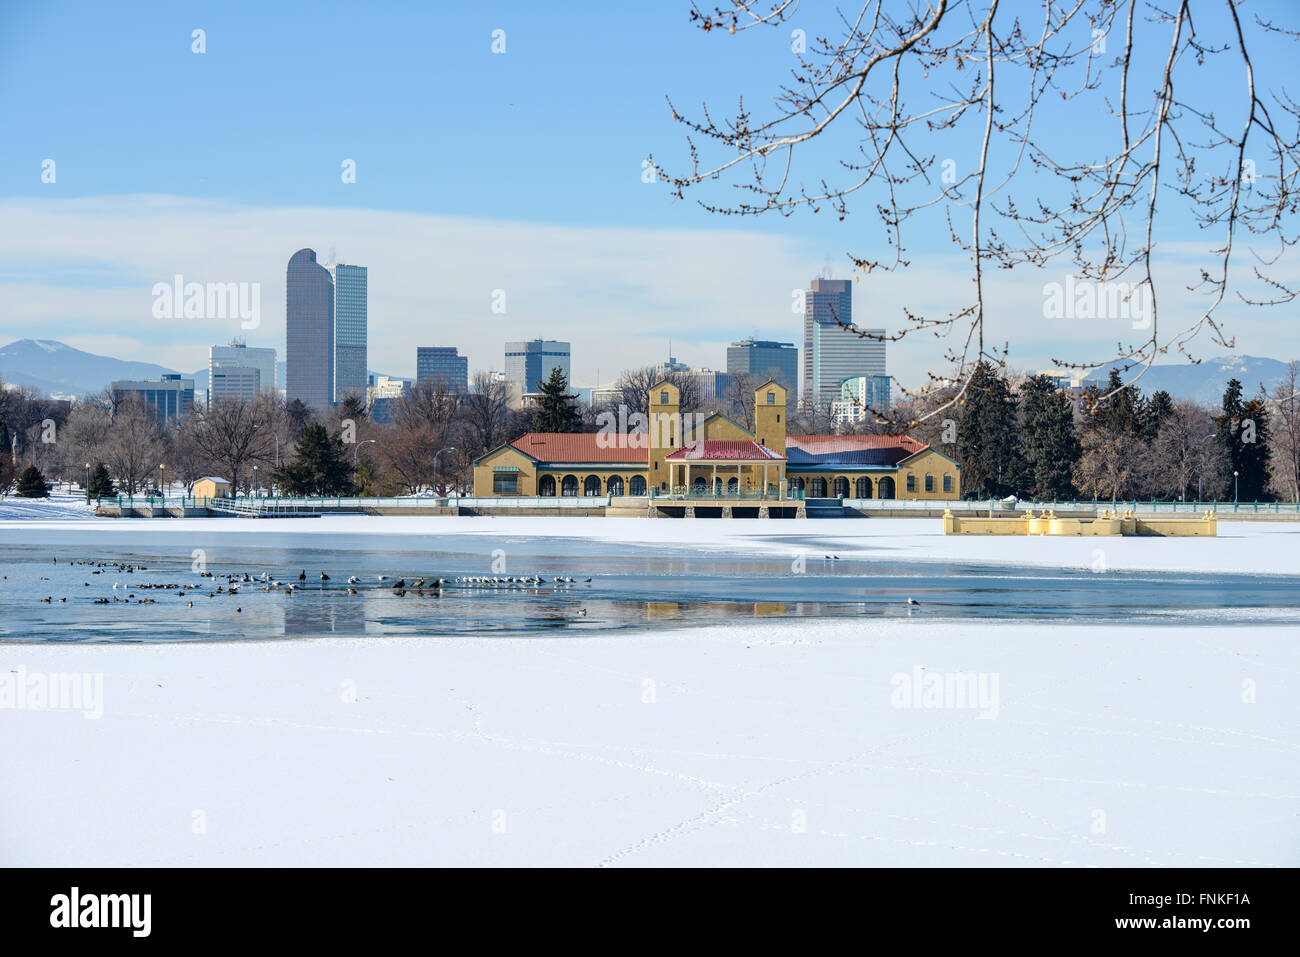 Winter at City Park - A white winter scene in a city park at east-side of Downtown Denver, Colorado, USA. Stock Photo